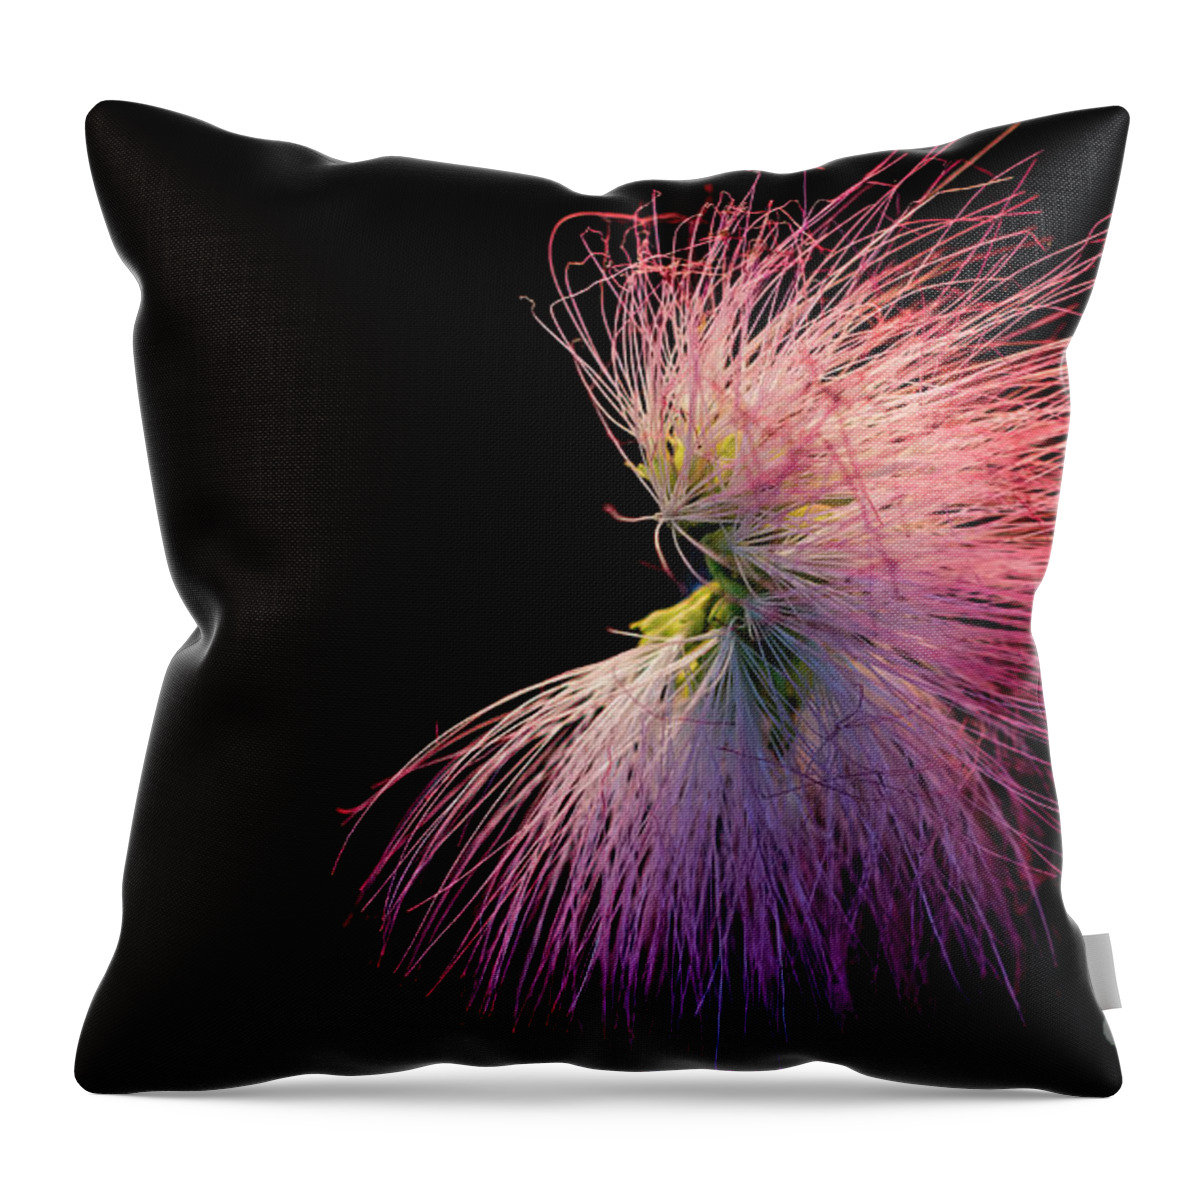 Landscape Throw Pillow featuring the photograph Mimosa Tree Blossom by Theresa D Williams